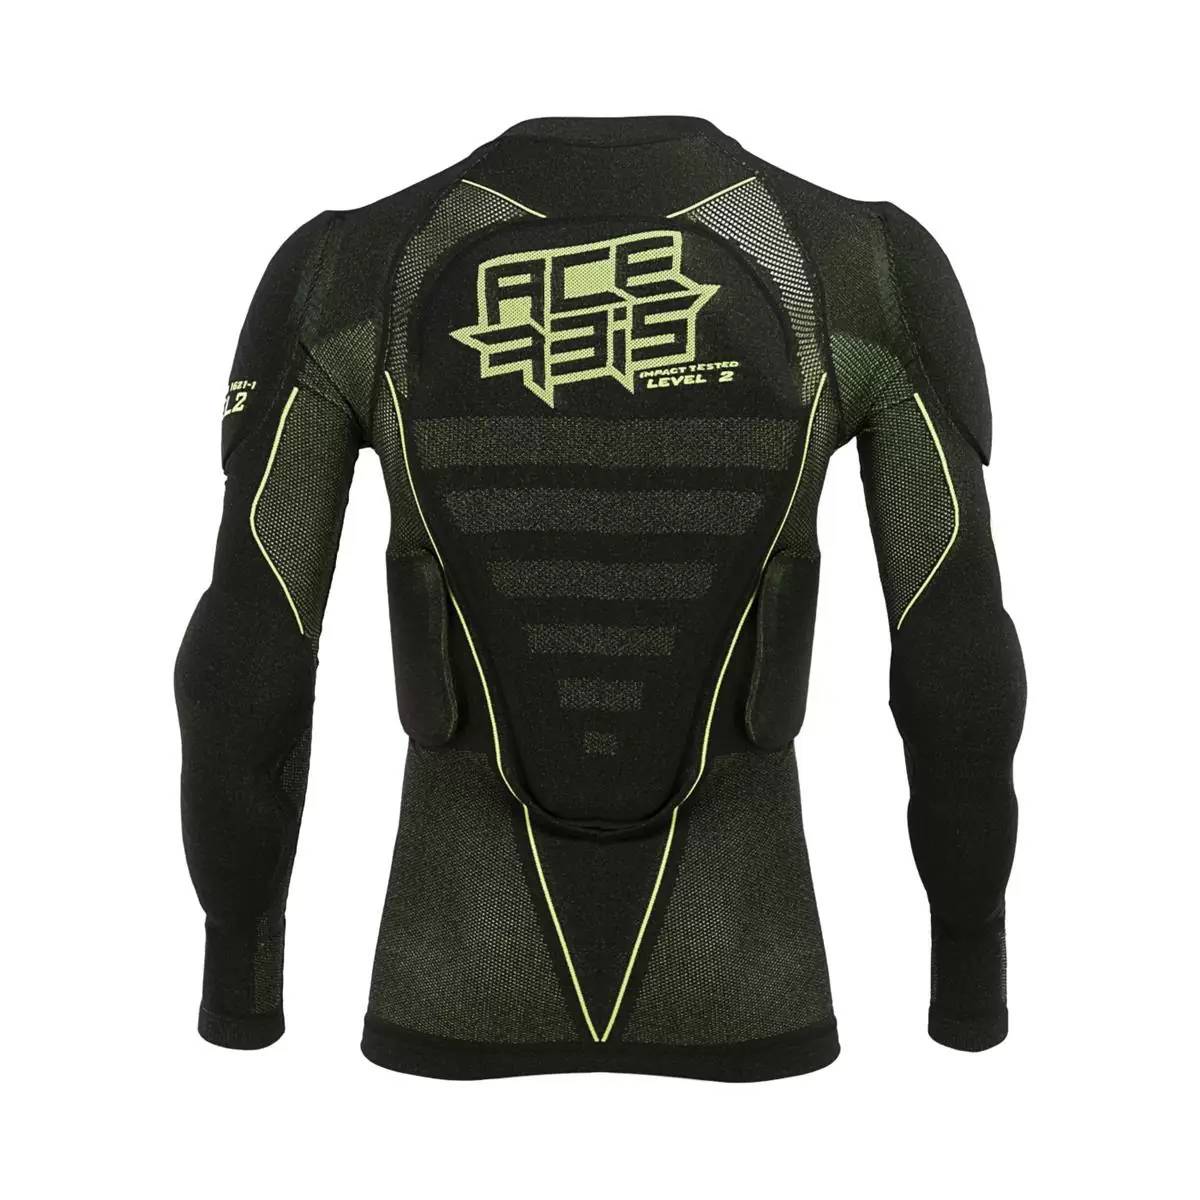 Body Armour X-Fit Future Level 2 Black/Yellow Size S/M #2